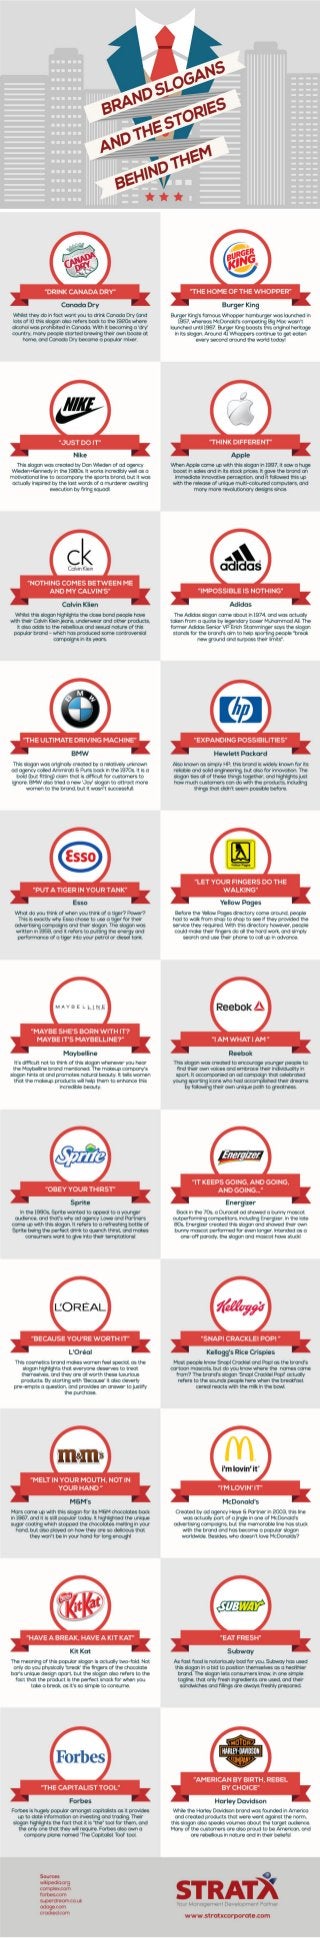 30 Brand Slogans and the Stories behind them